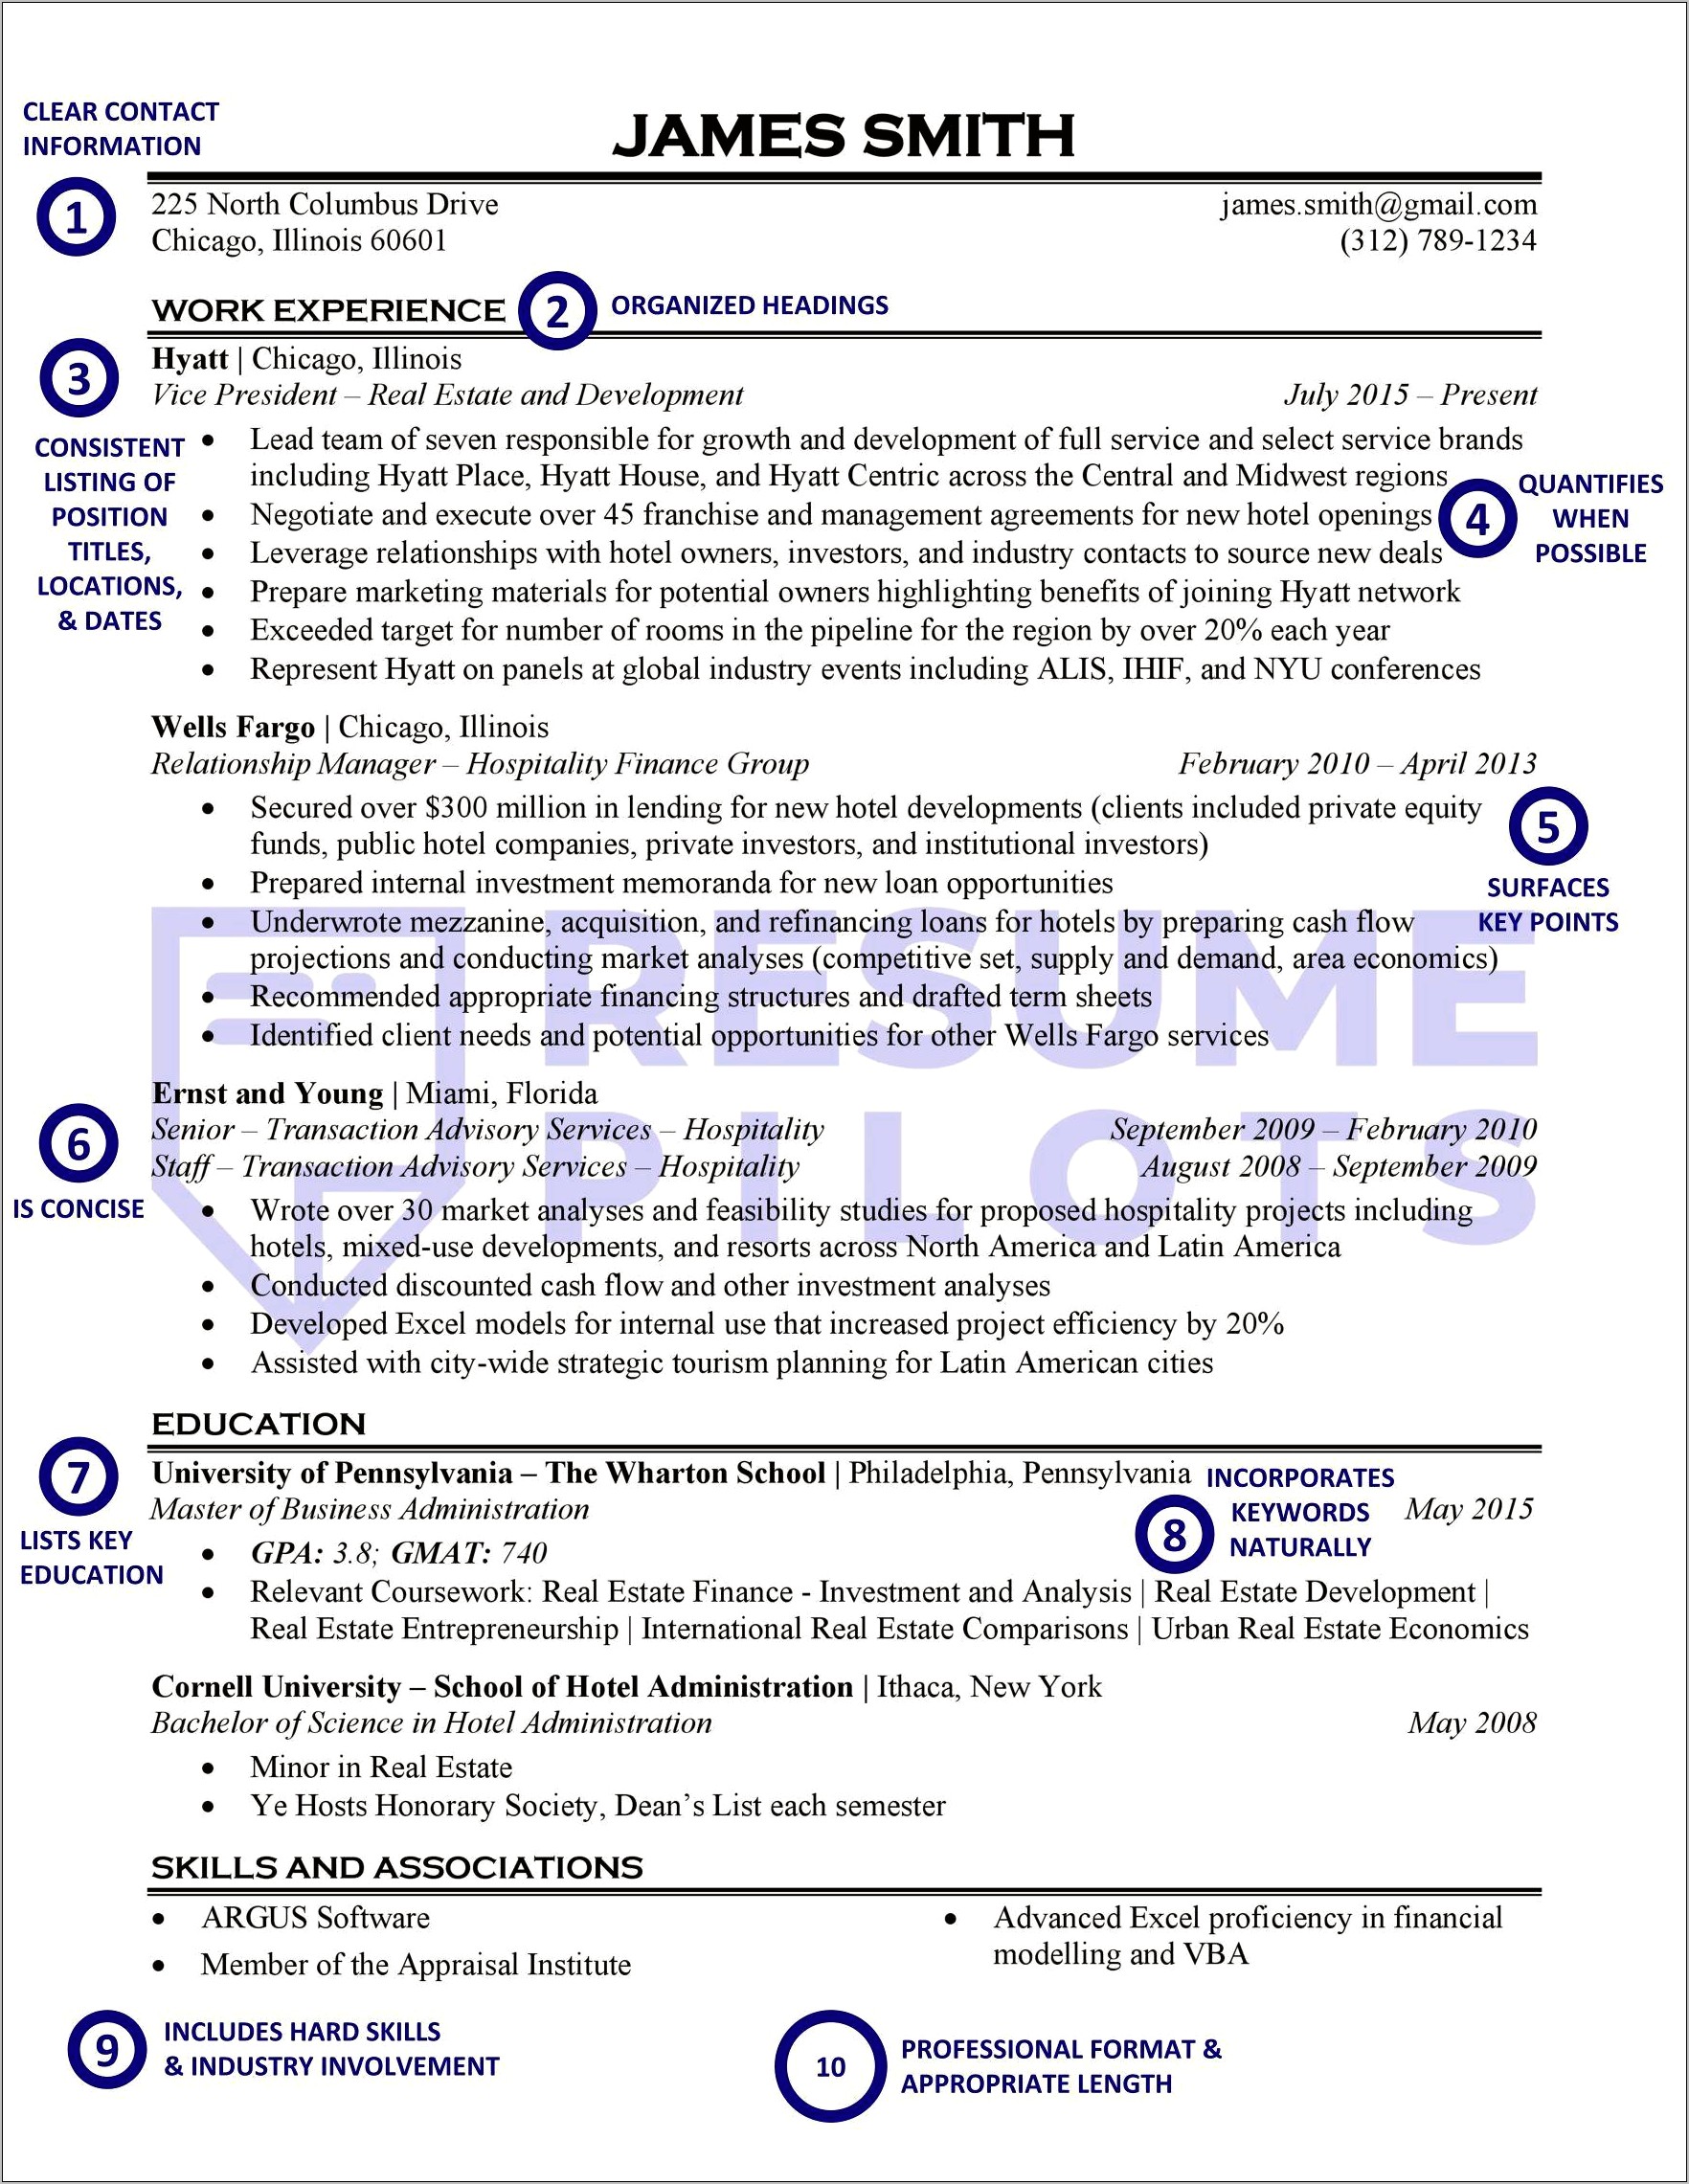 Resume With Dean's List Sample